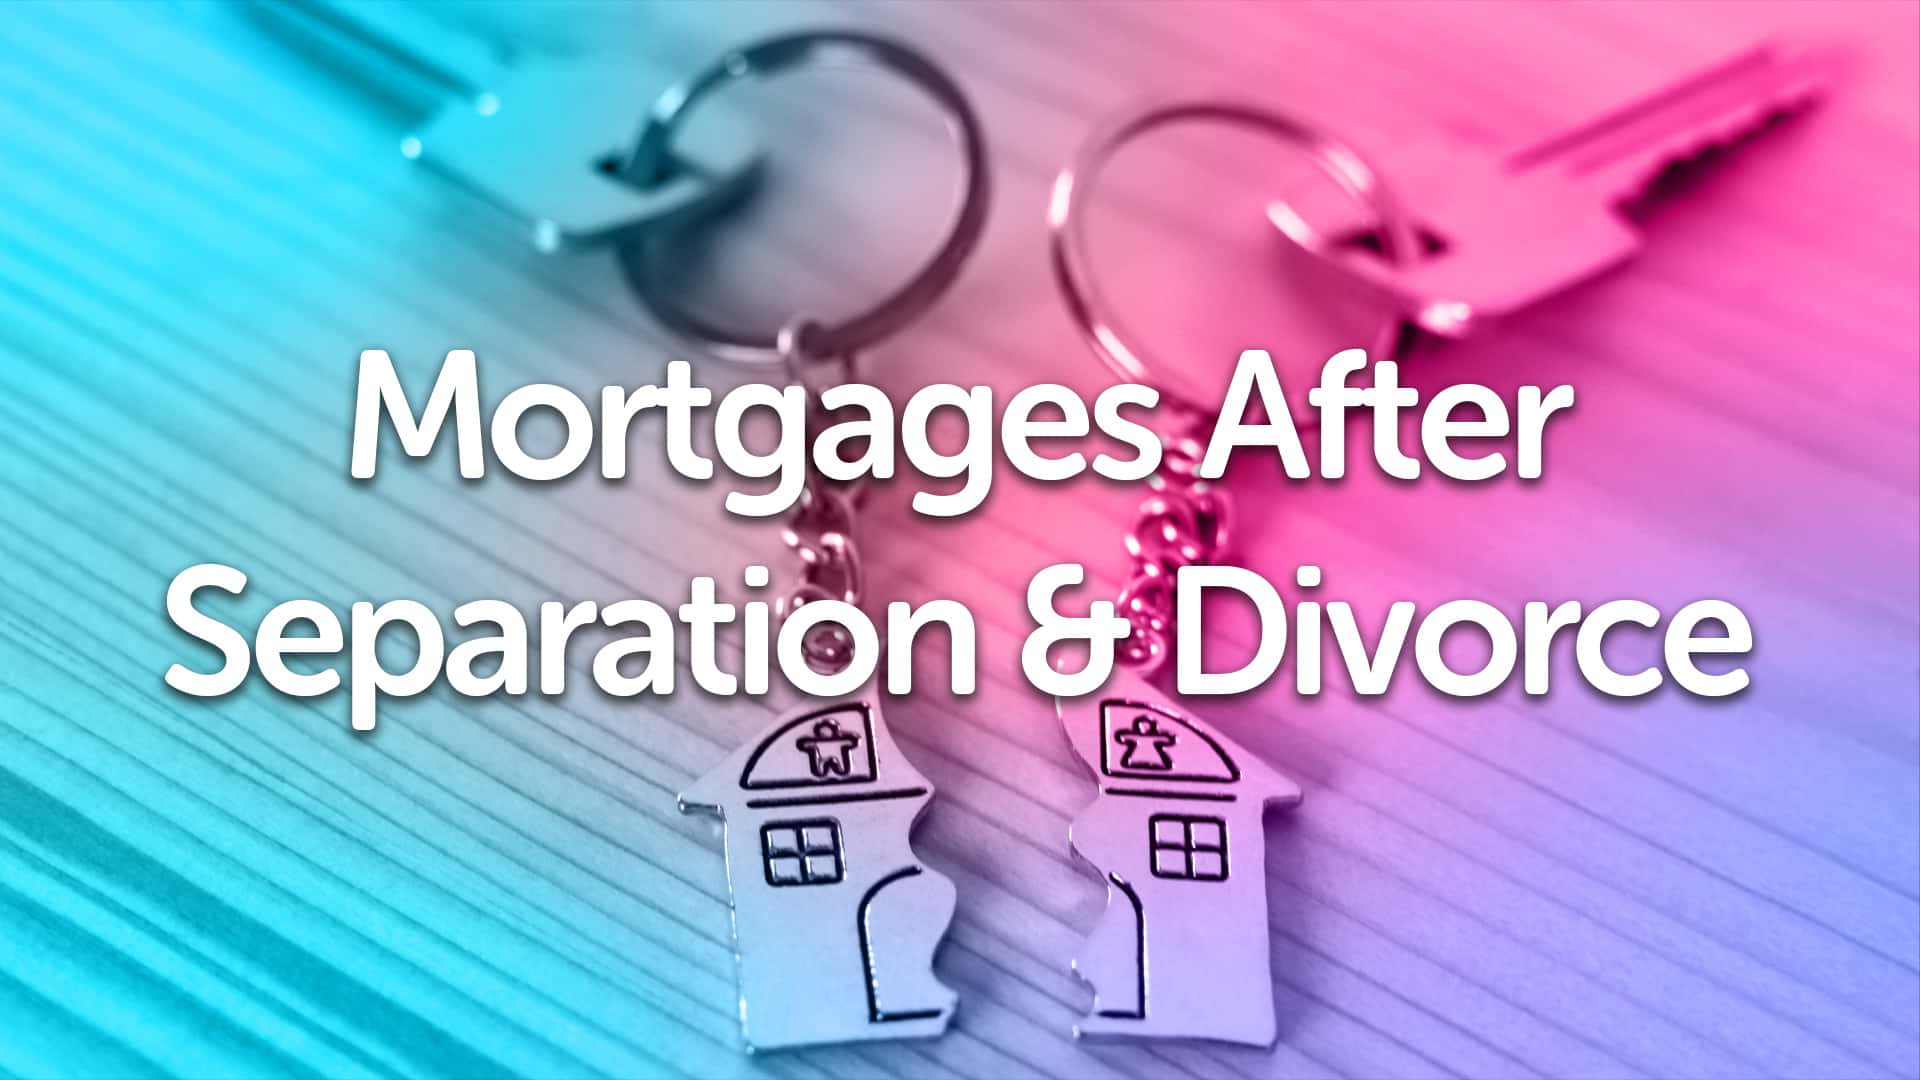 Divorce & Separation Mortgage Advice in Liverpool